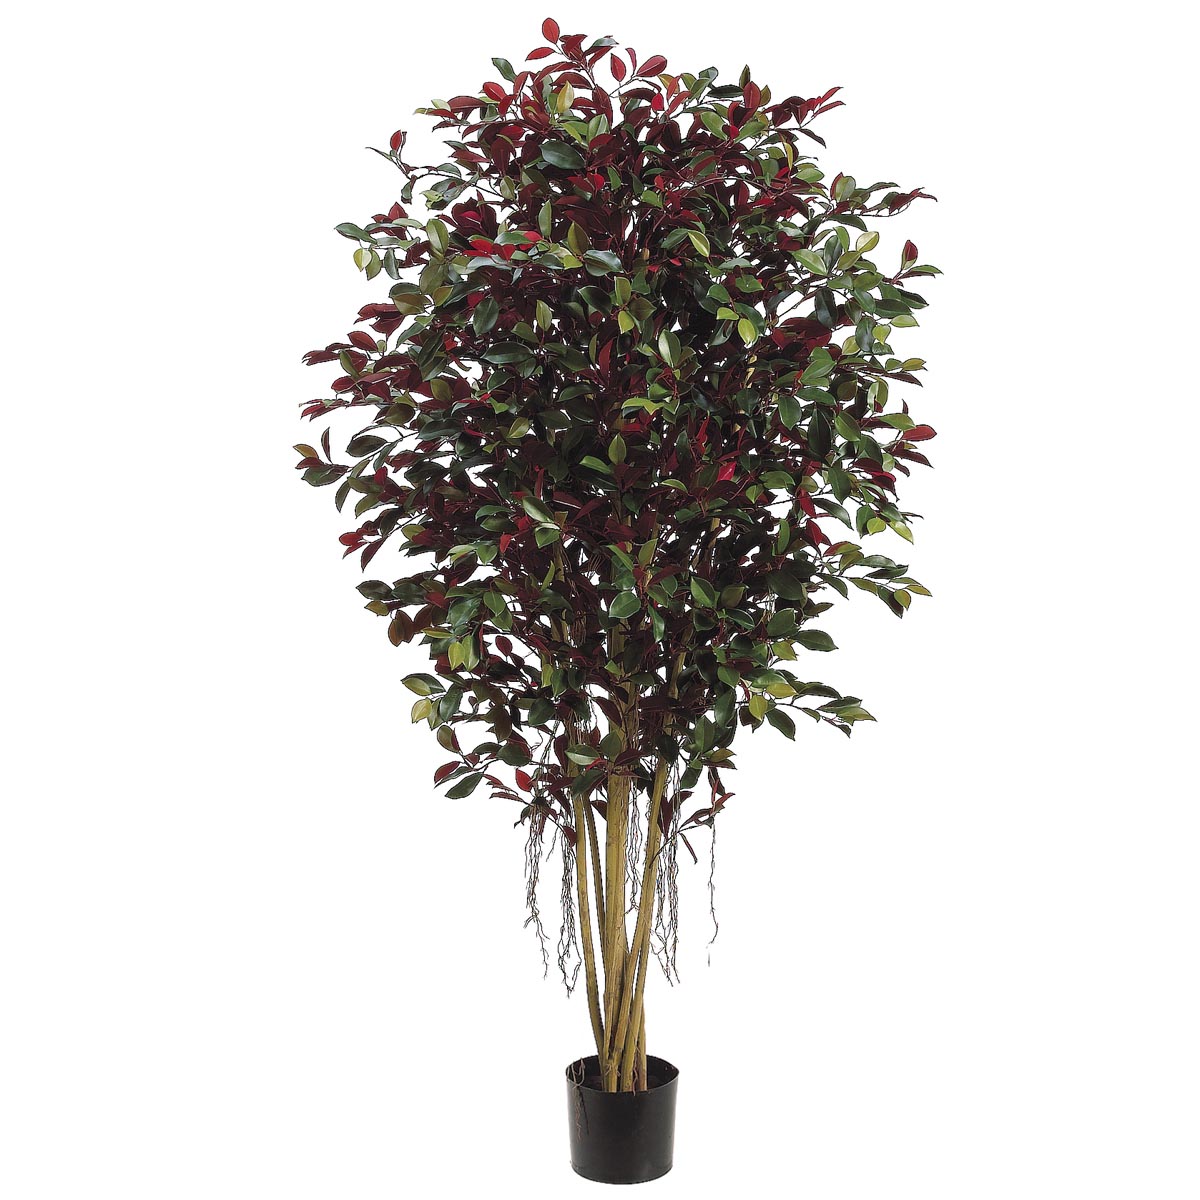 5 Foot Red Ficus Retusa Full Tree With Air Roots: Potted